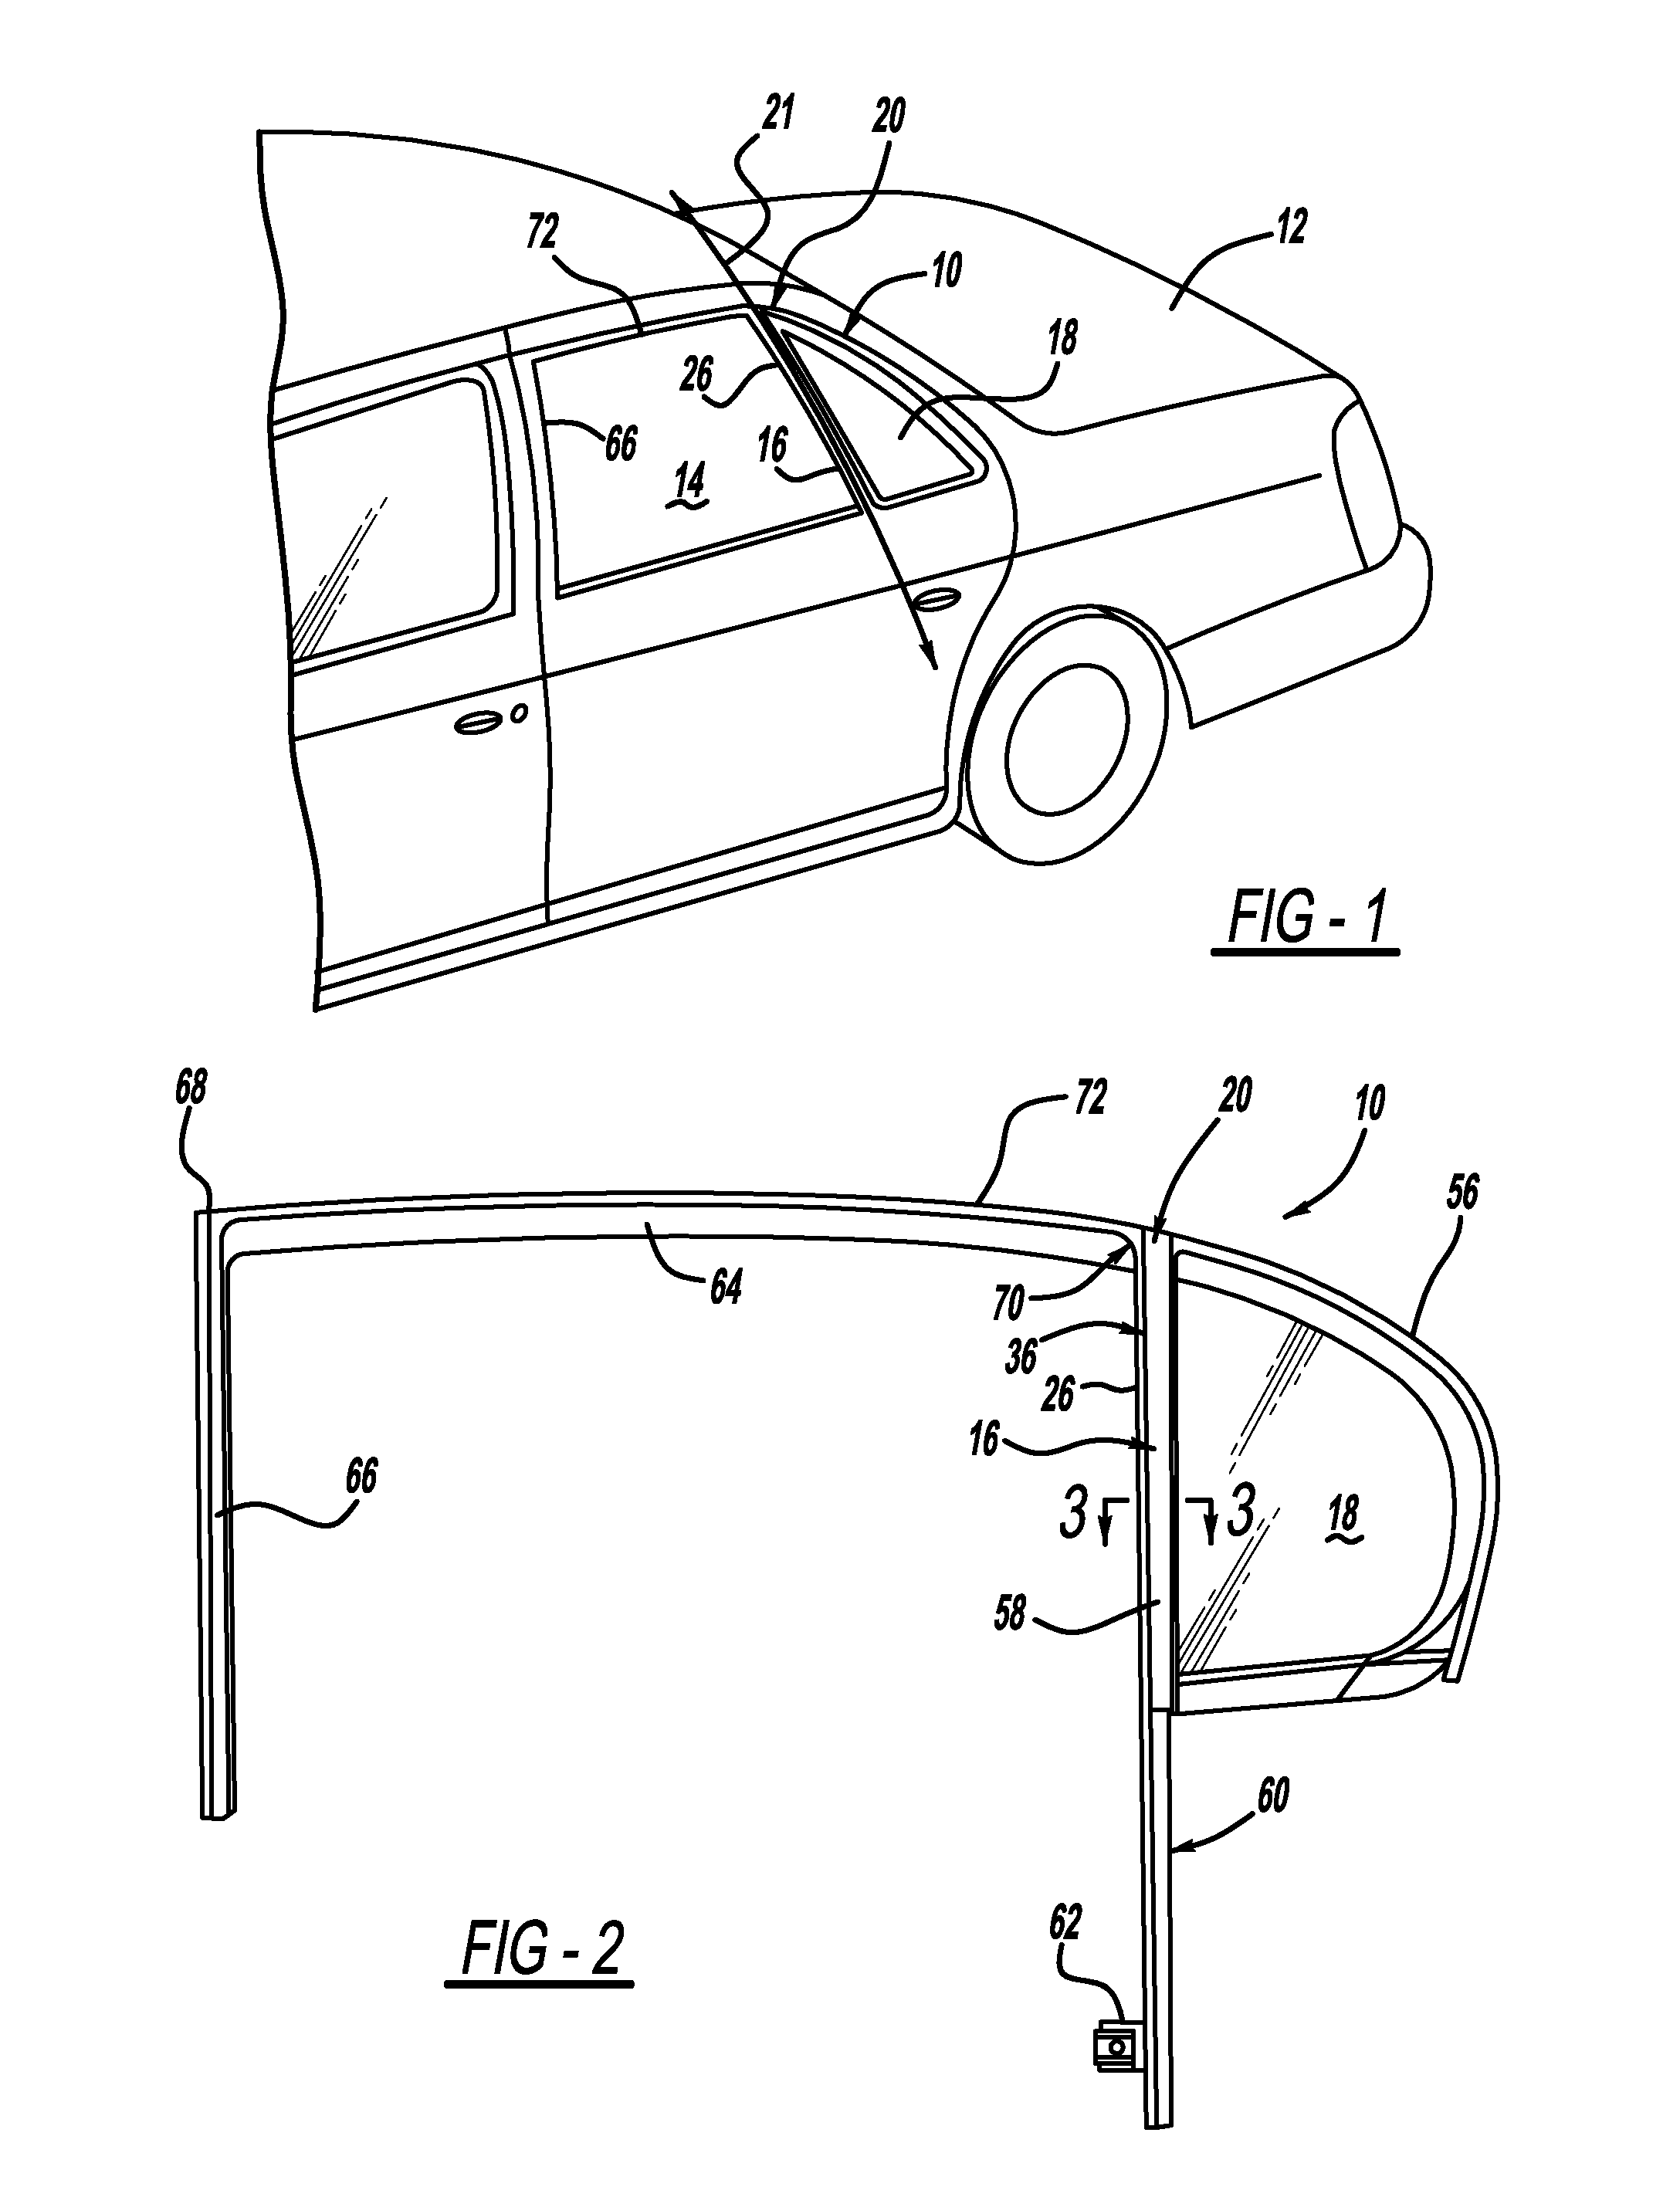 Method of forming unsupported division post for automotive glass encapsulation